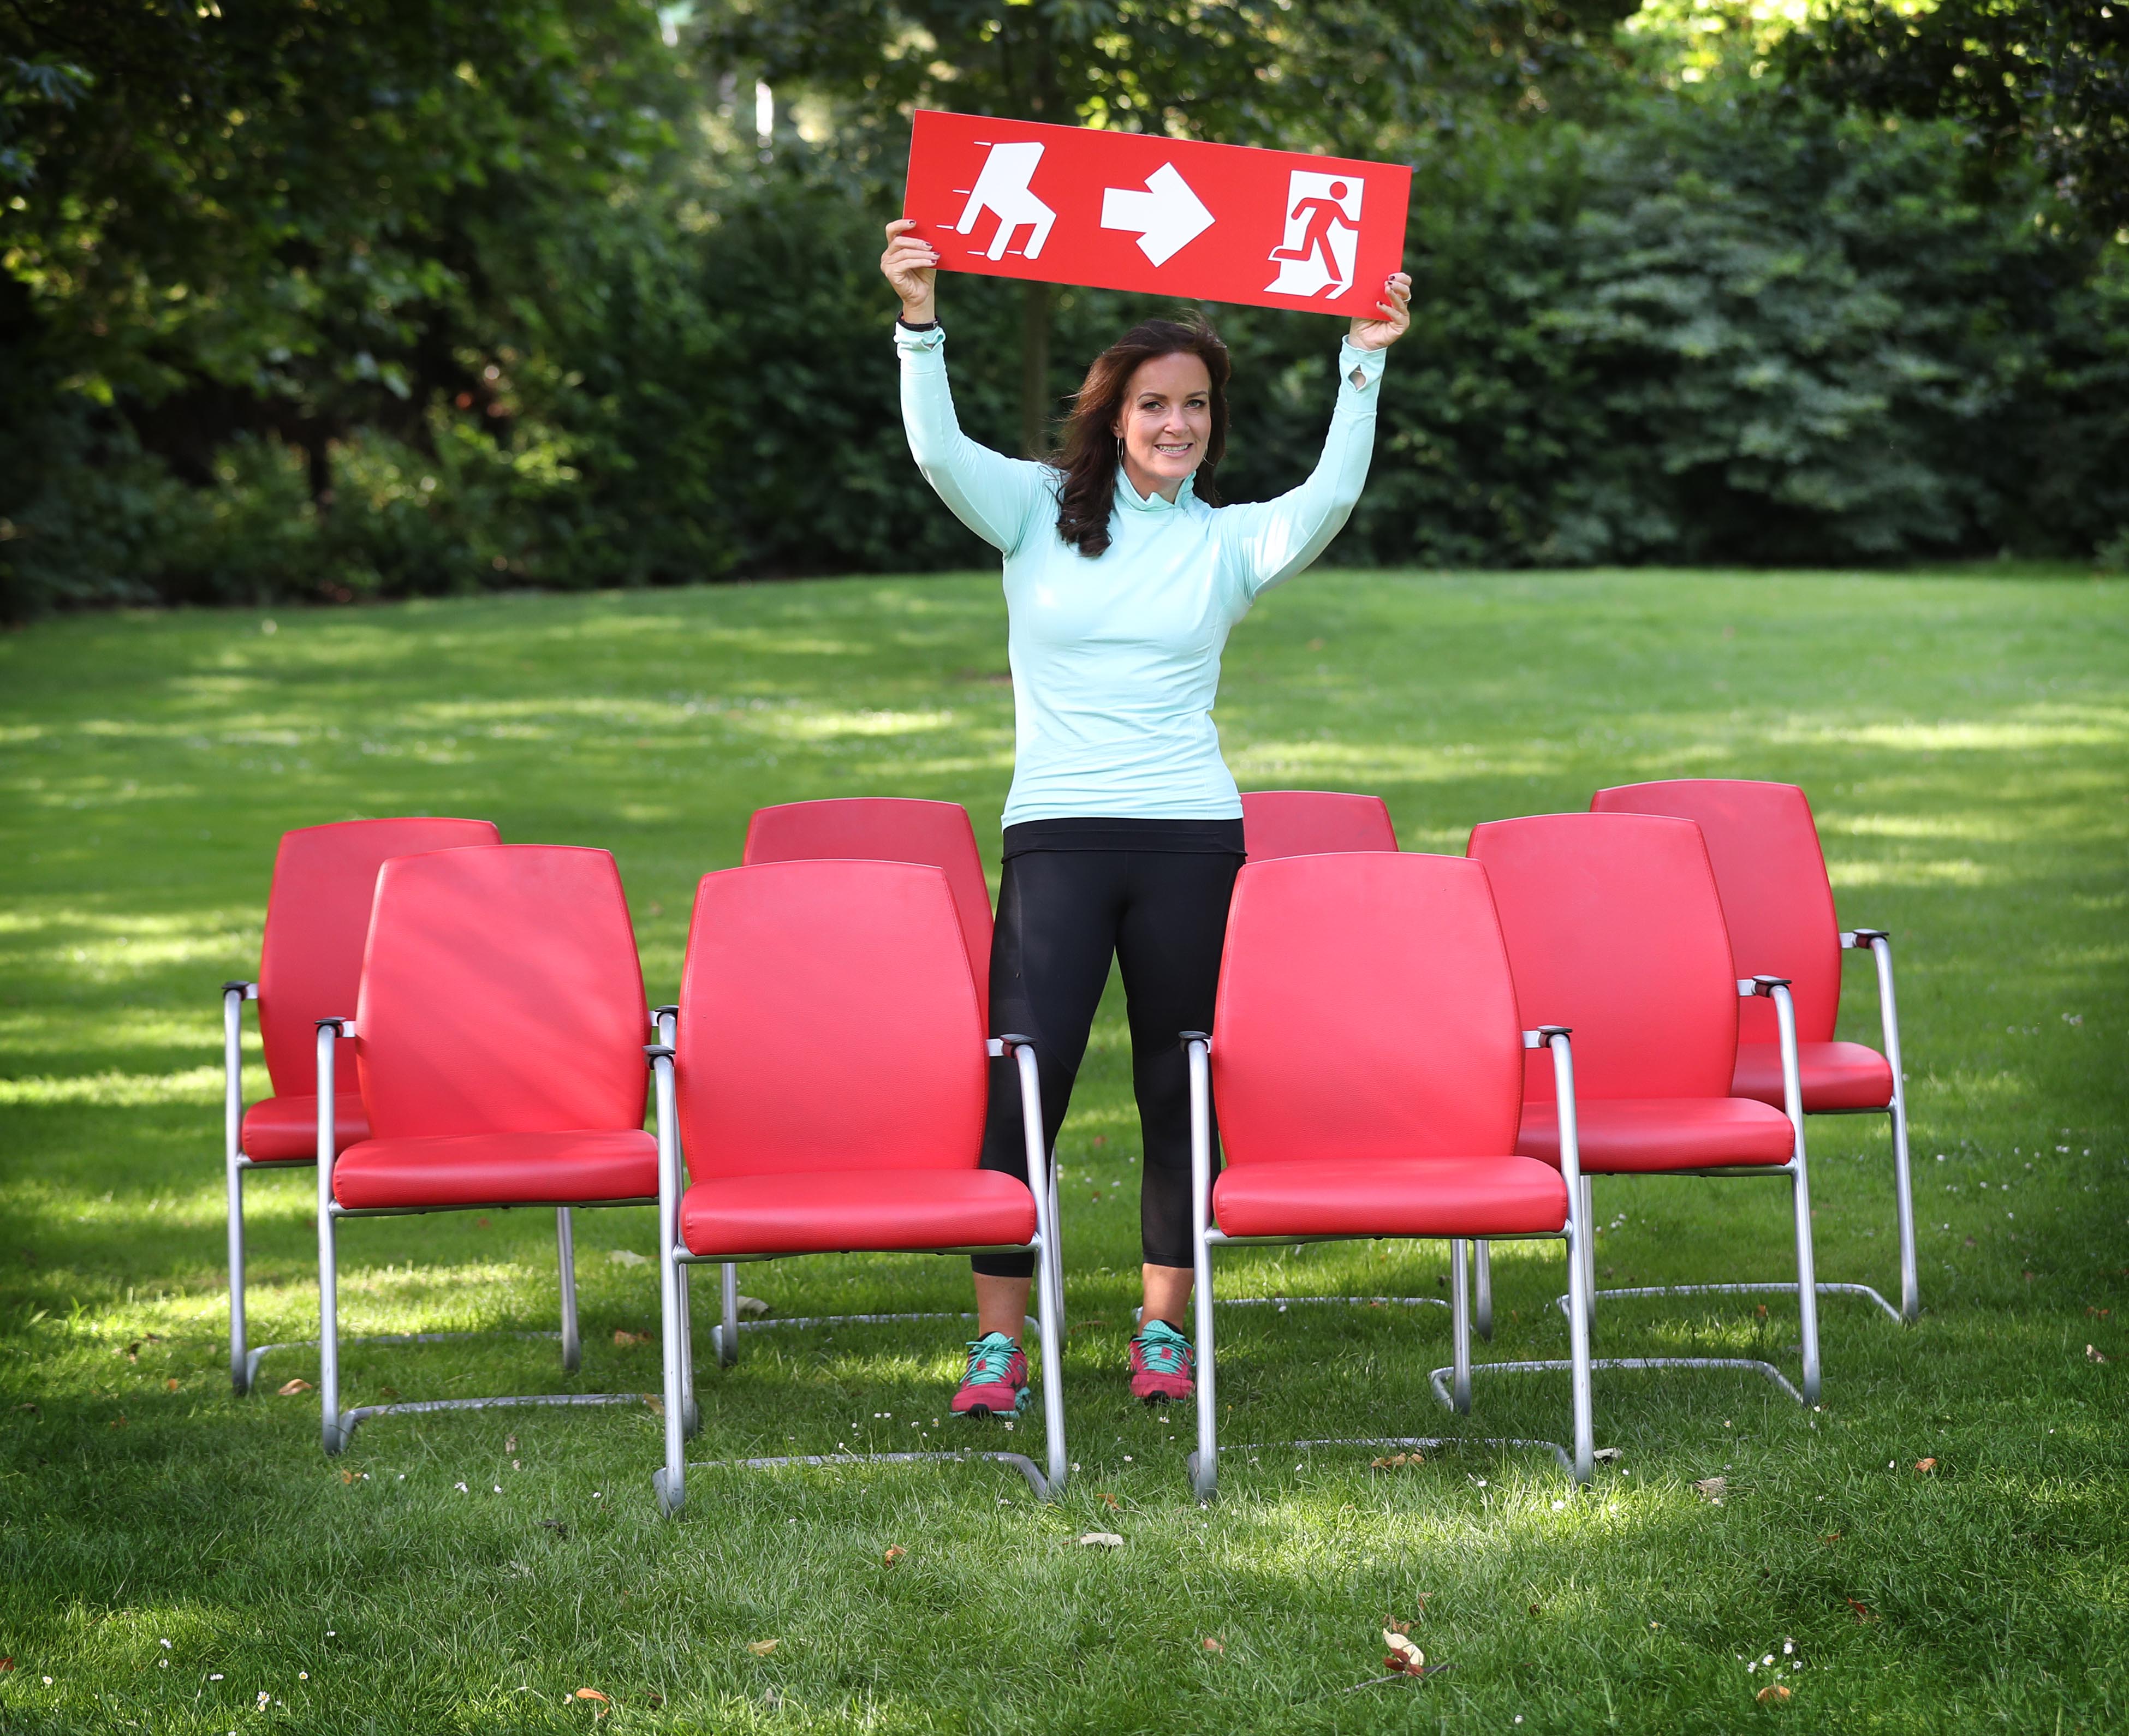 Irish Heart Foundation calls on the people of Offaly to escape their chair this September